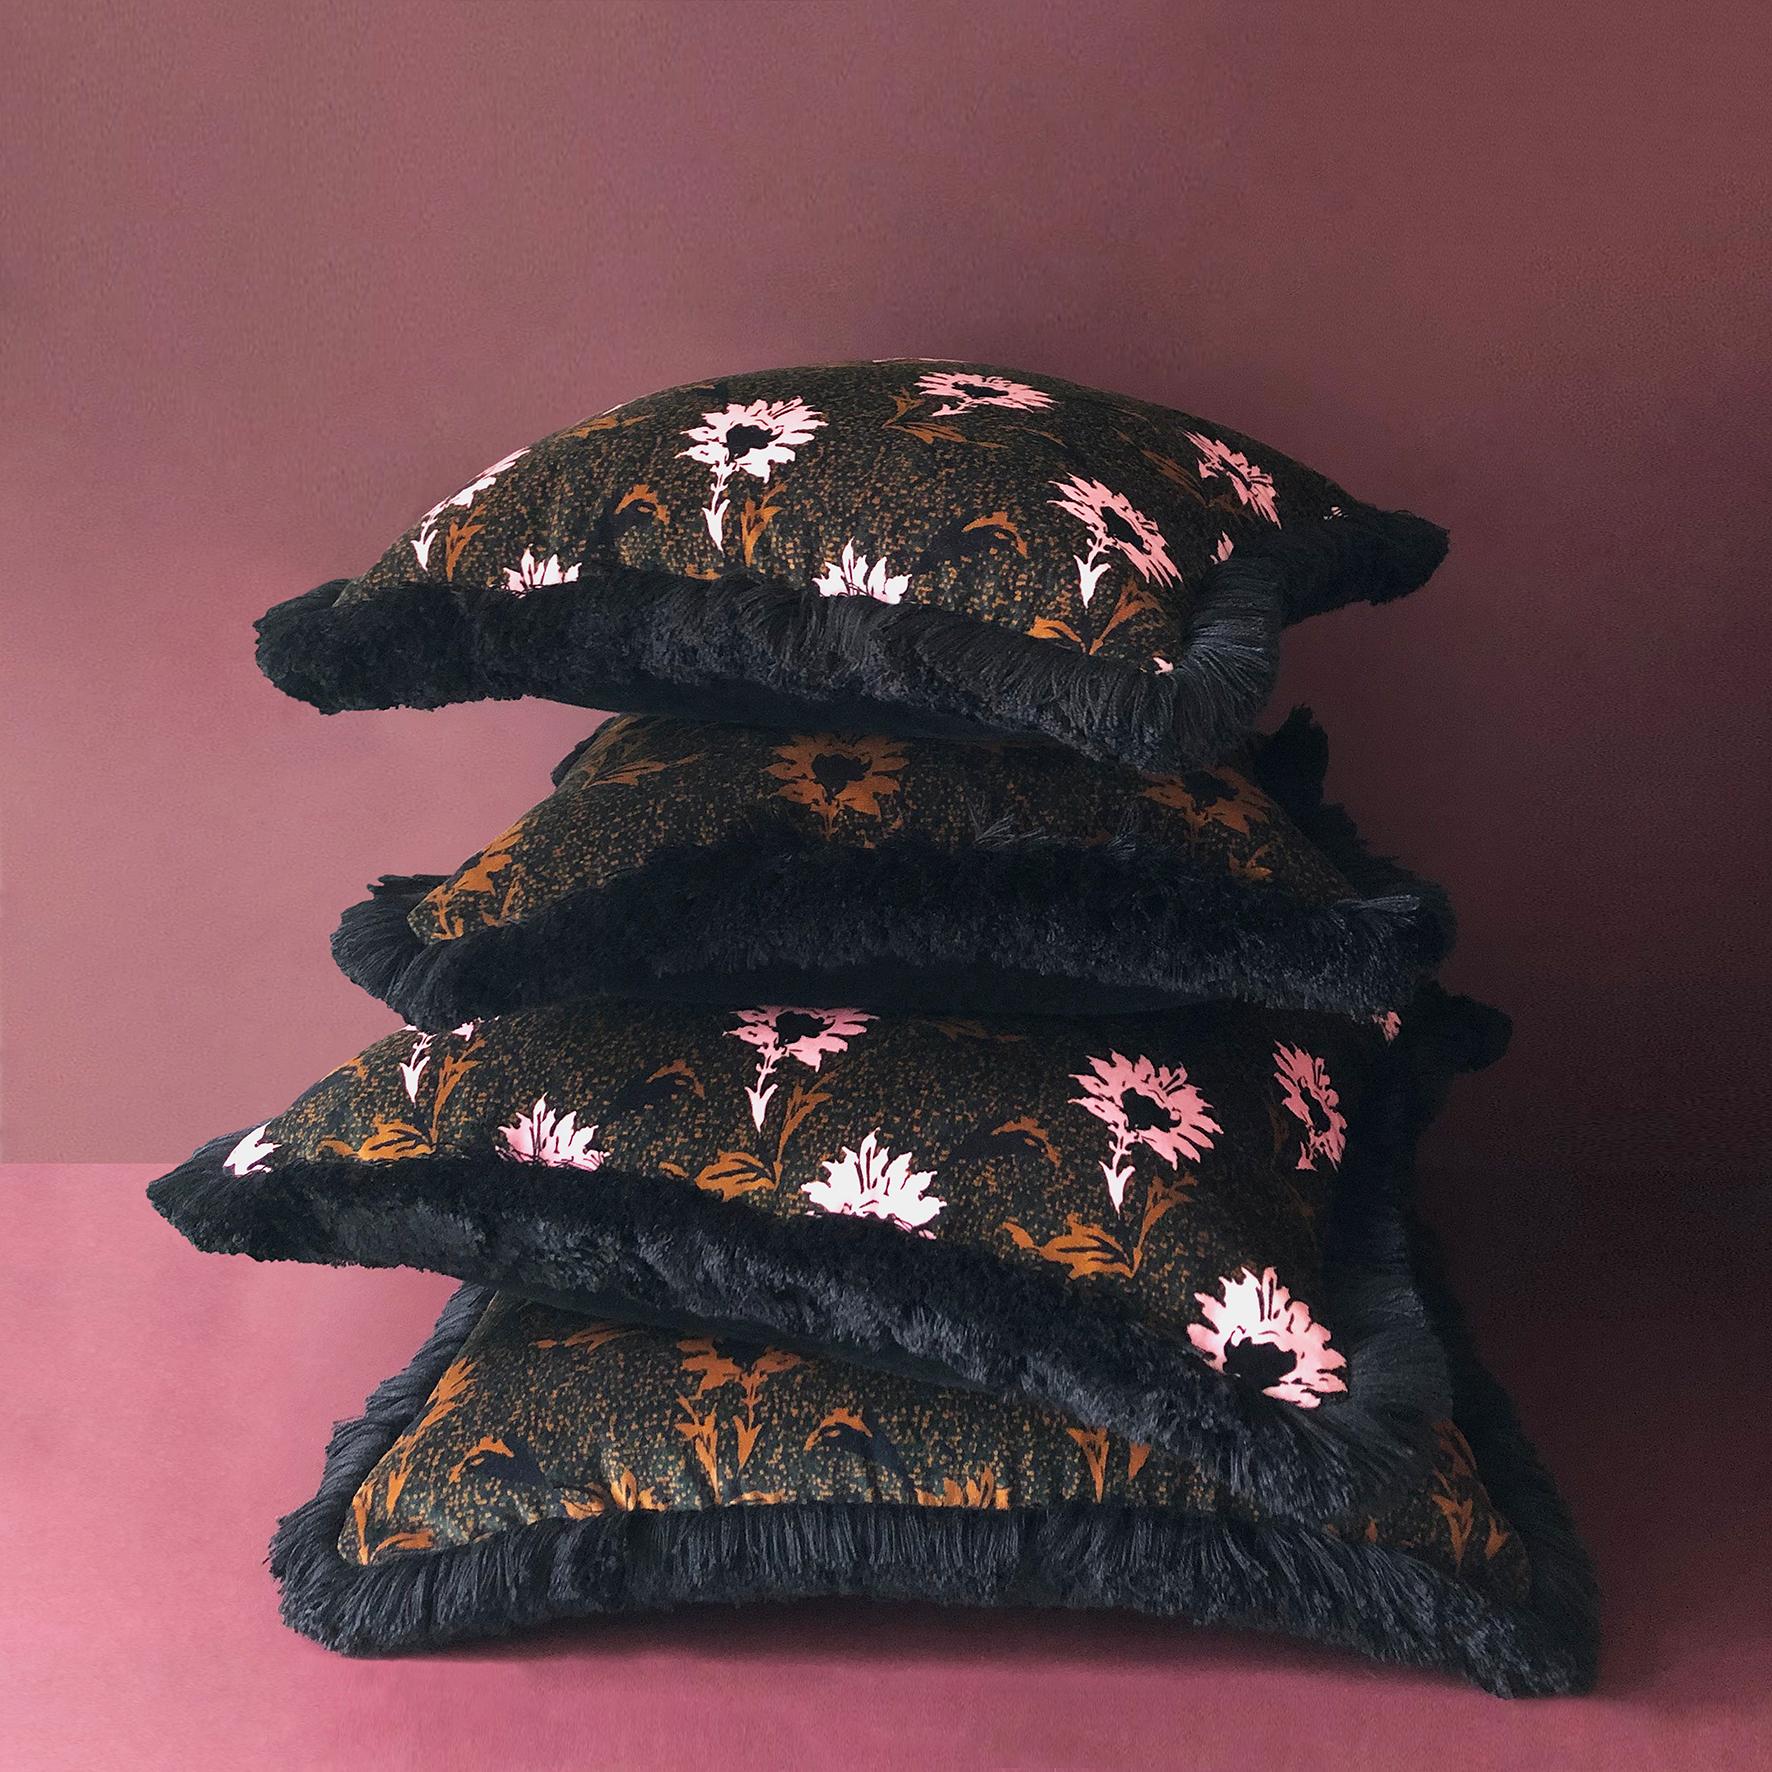 Bring some floral finesse to your home with our velvet flower cushions. Inspired by founder Eleanor Nadimi’s Iranian heritage this design draws upon traditional floral patterns typical of the region.
Made in Britain this cushion is printed onto a